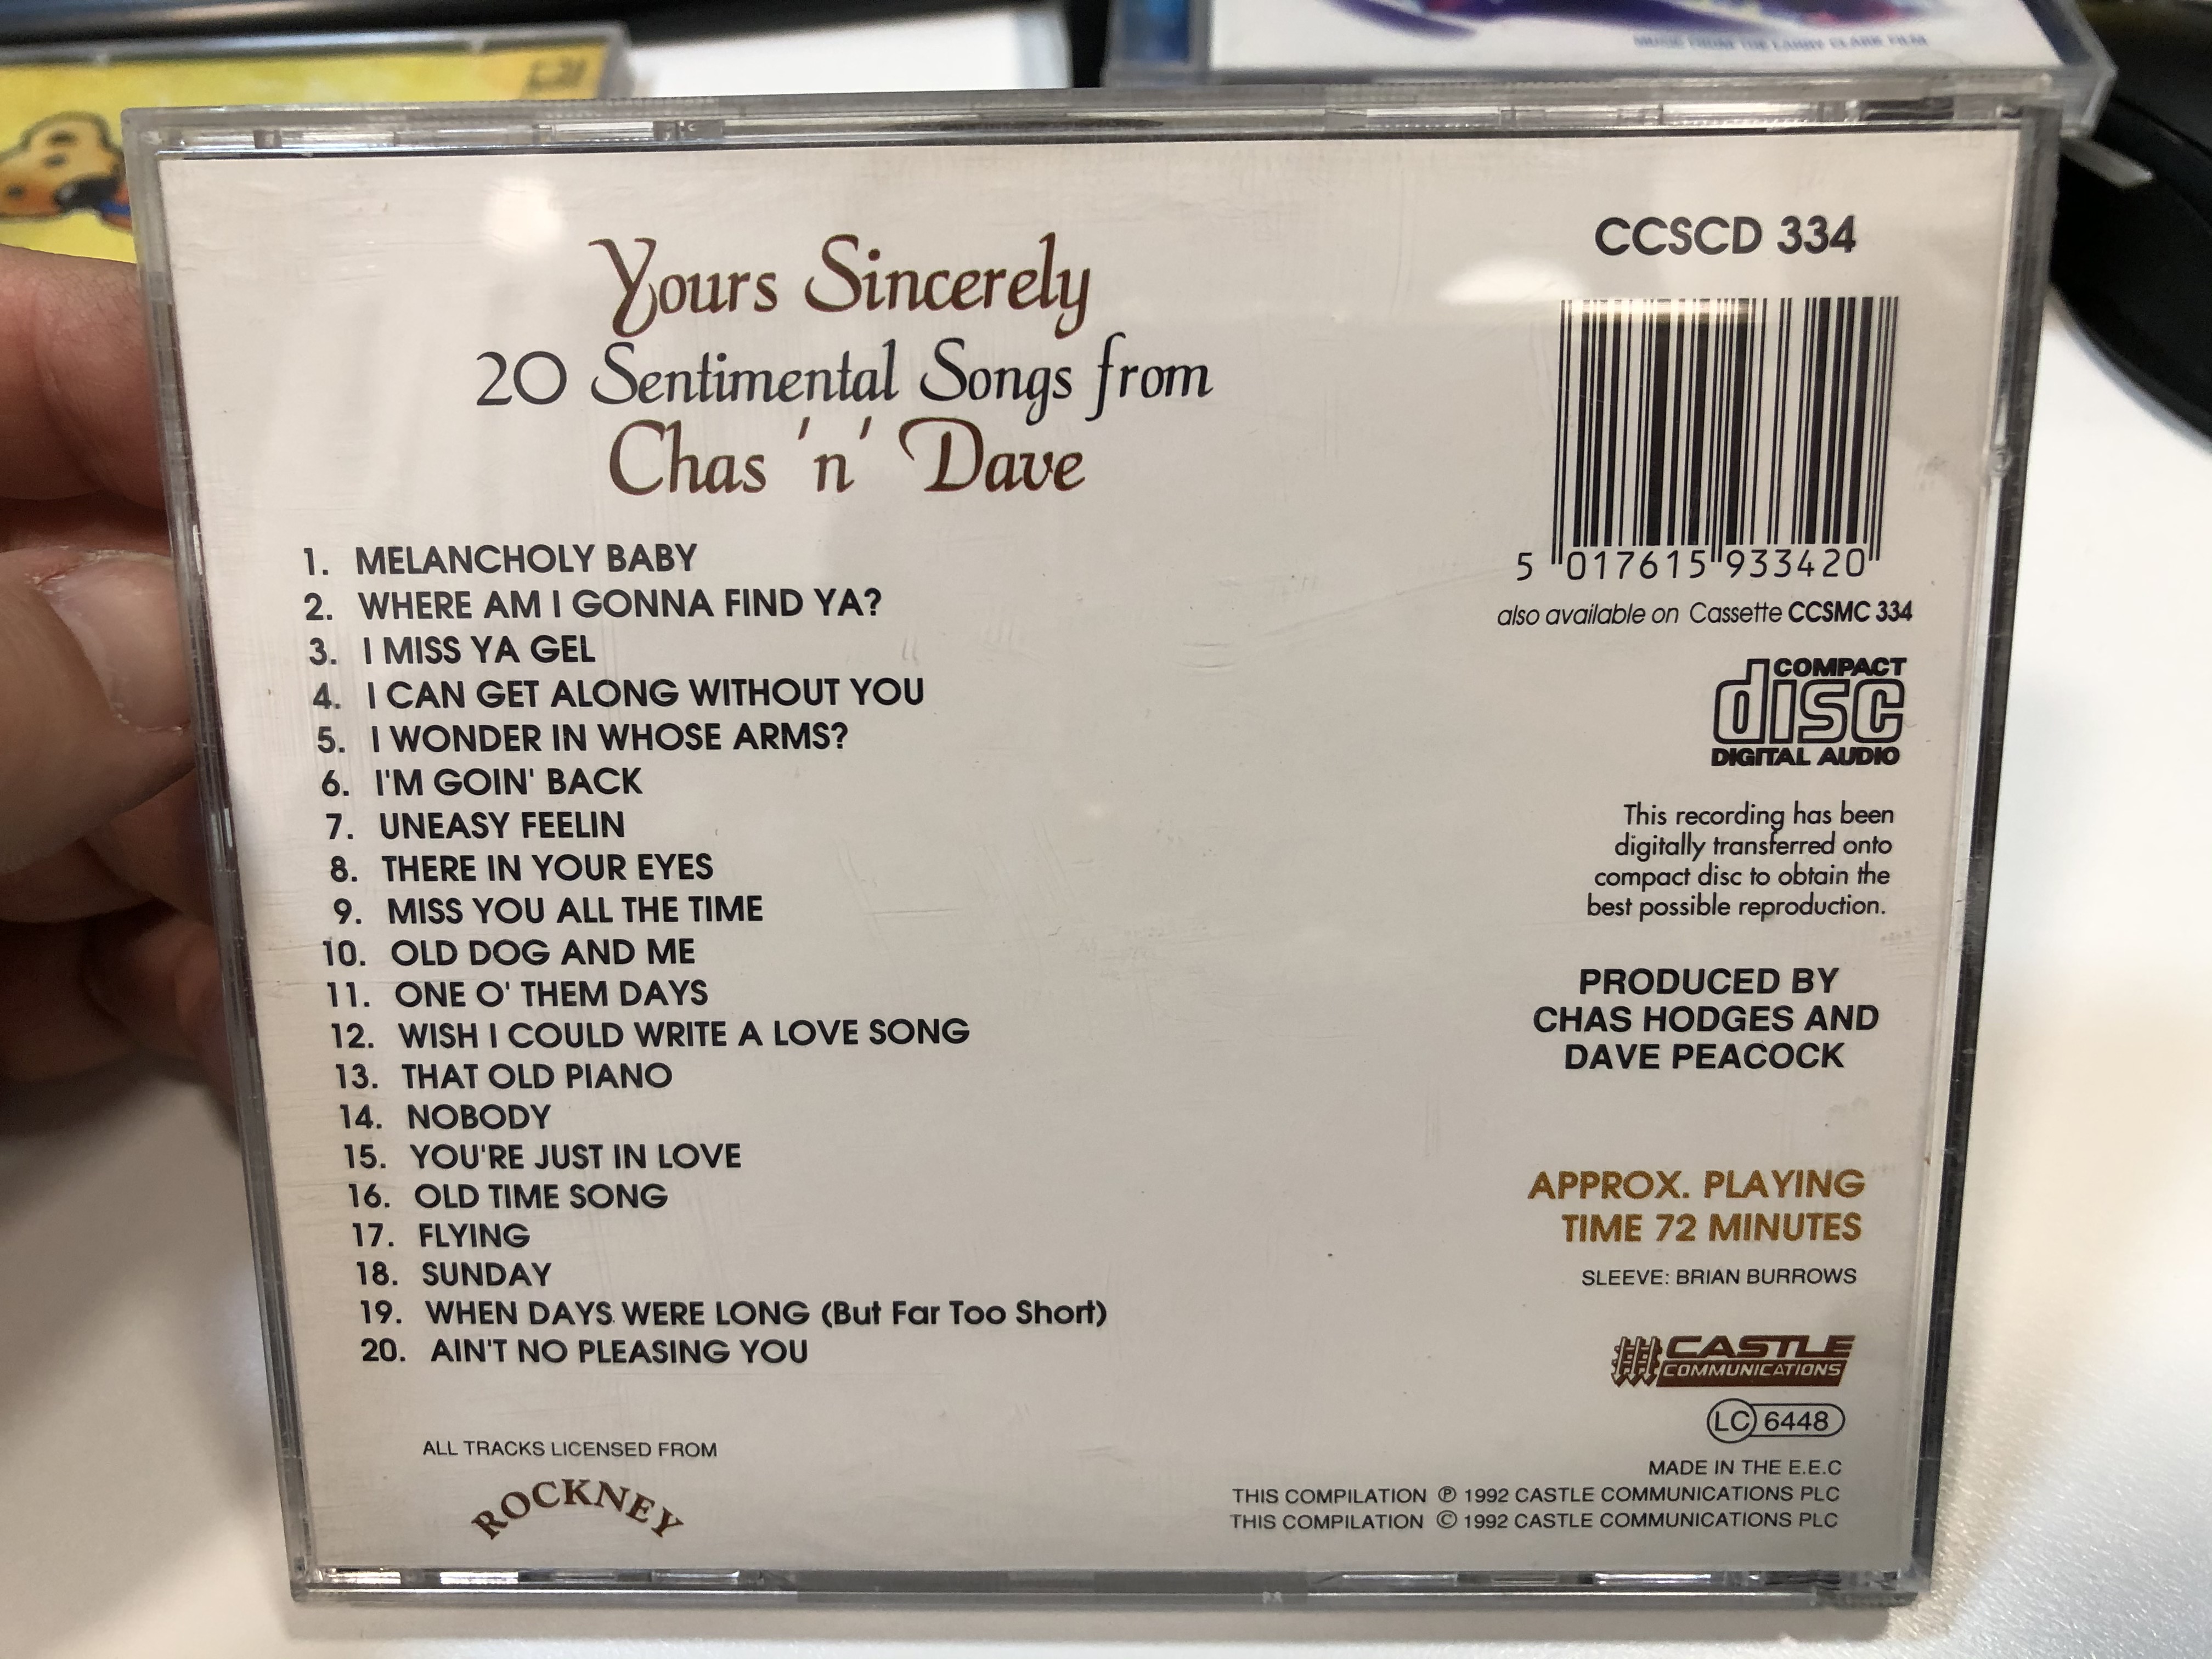 20-sentimental-songs-from-chas-n-dave-yours-sincerely-the-collector-series-castle-communications-audio-cd-1992-ccscd-334-4-.jpg